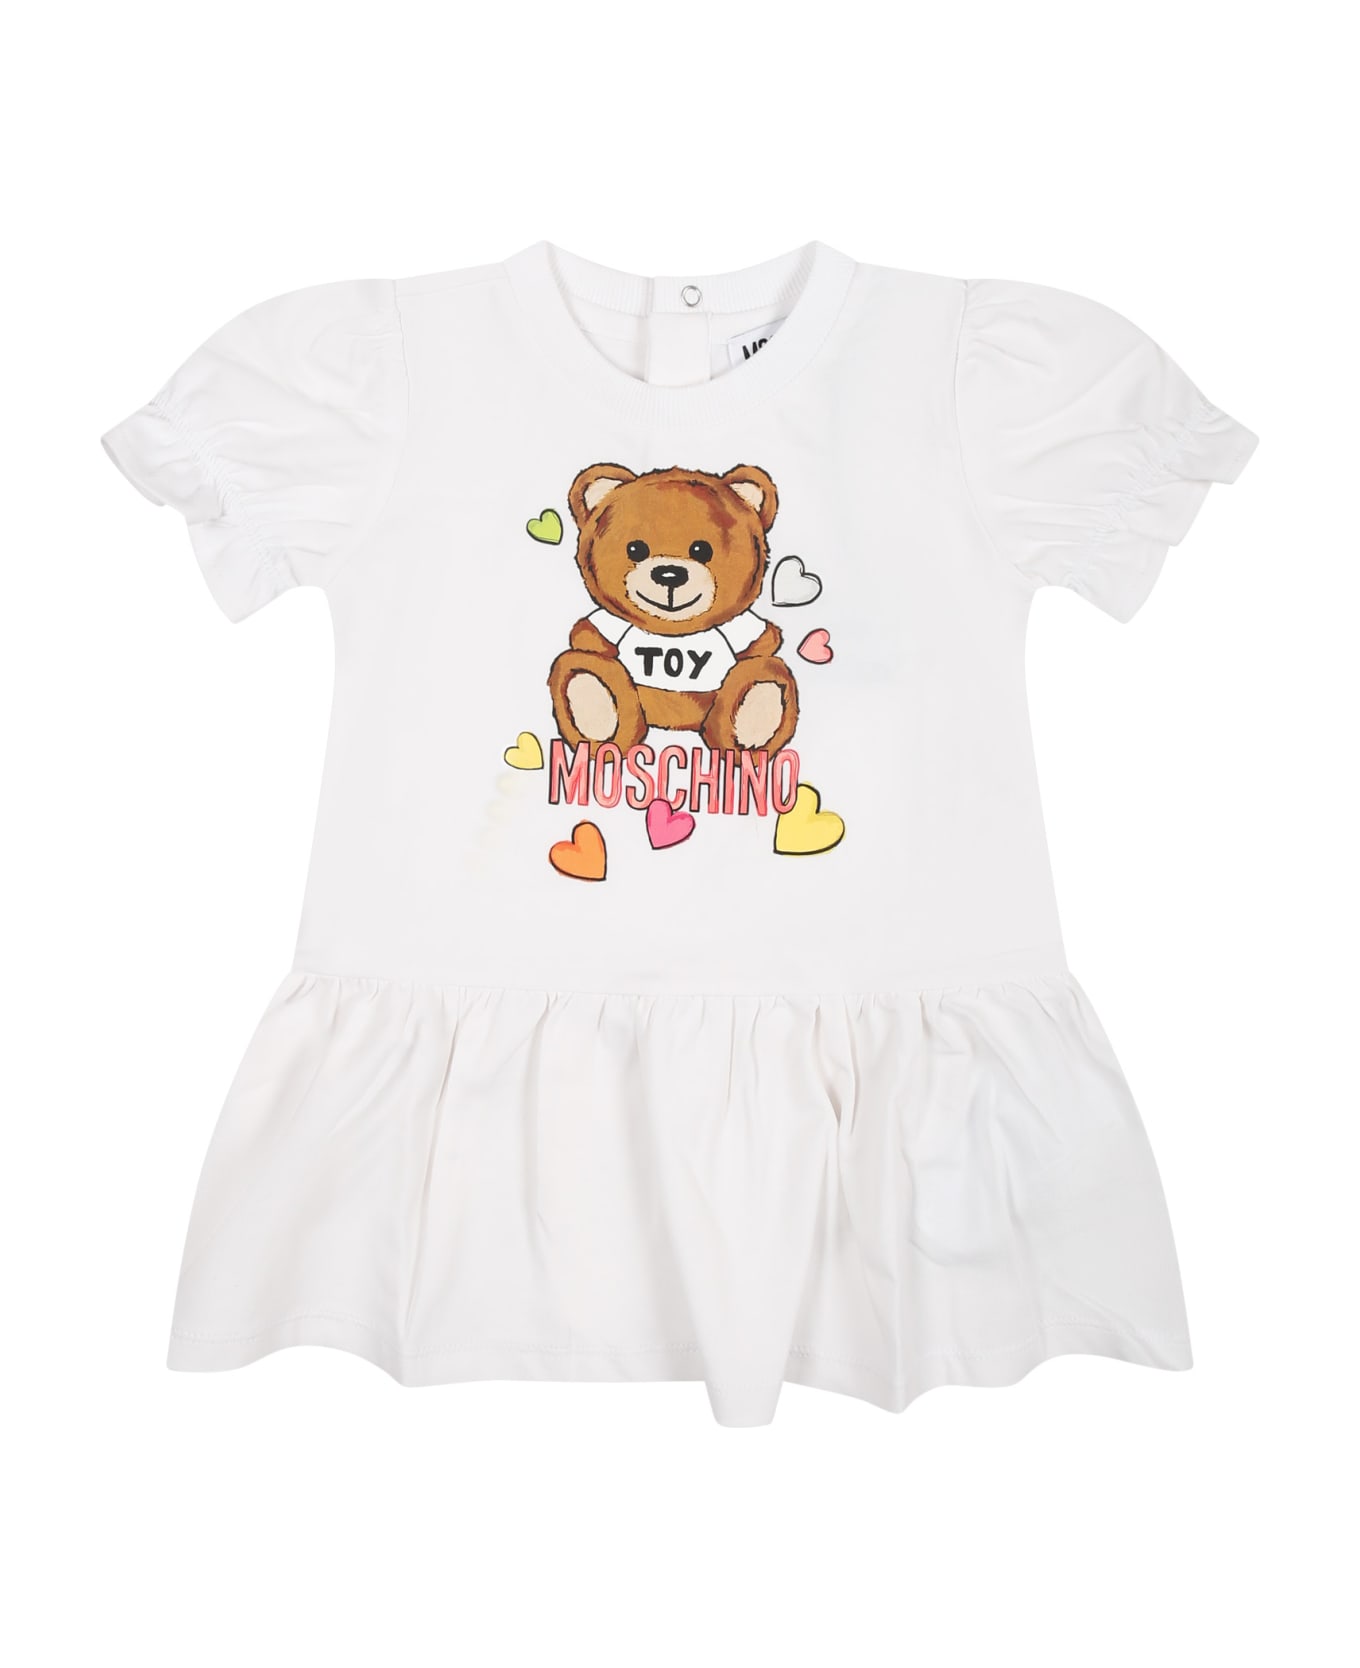 Moschino White Dress For Baby Girl With Teddy Bear Print - White